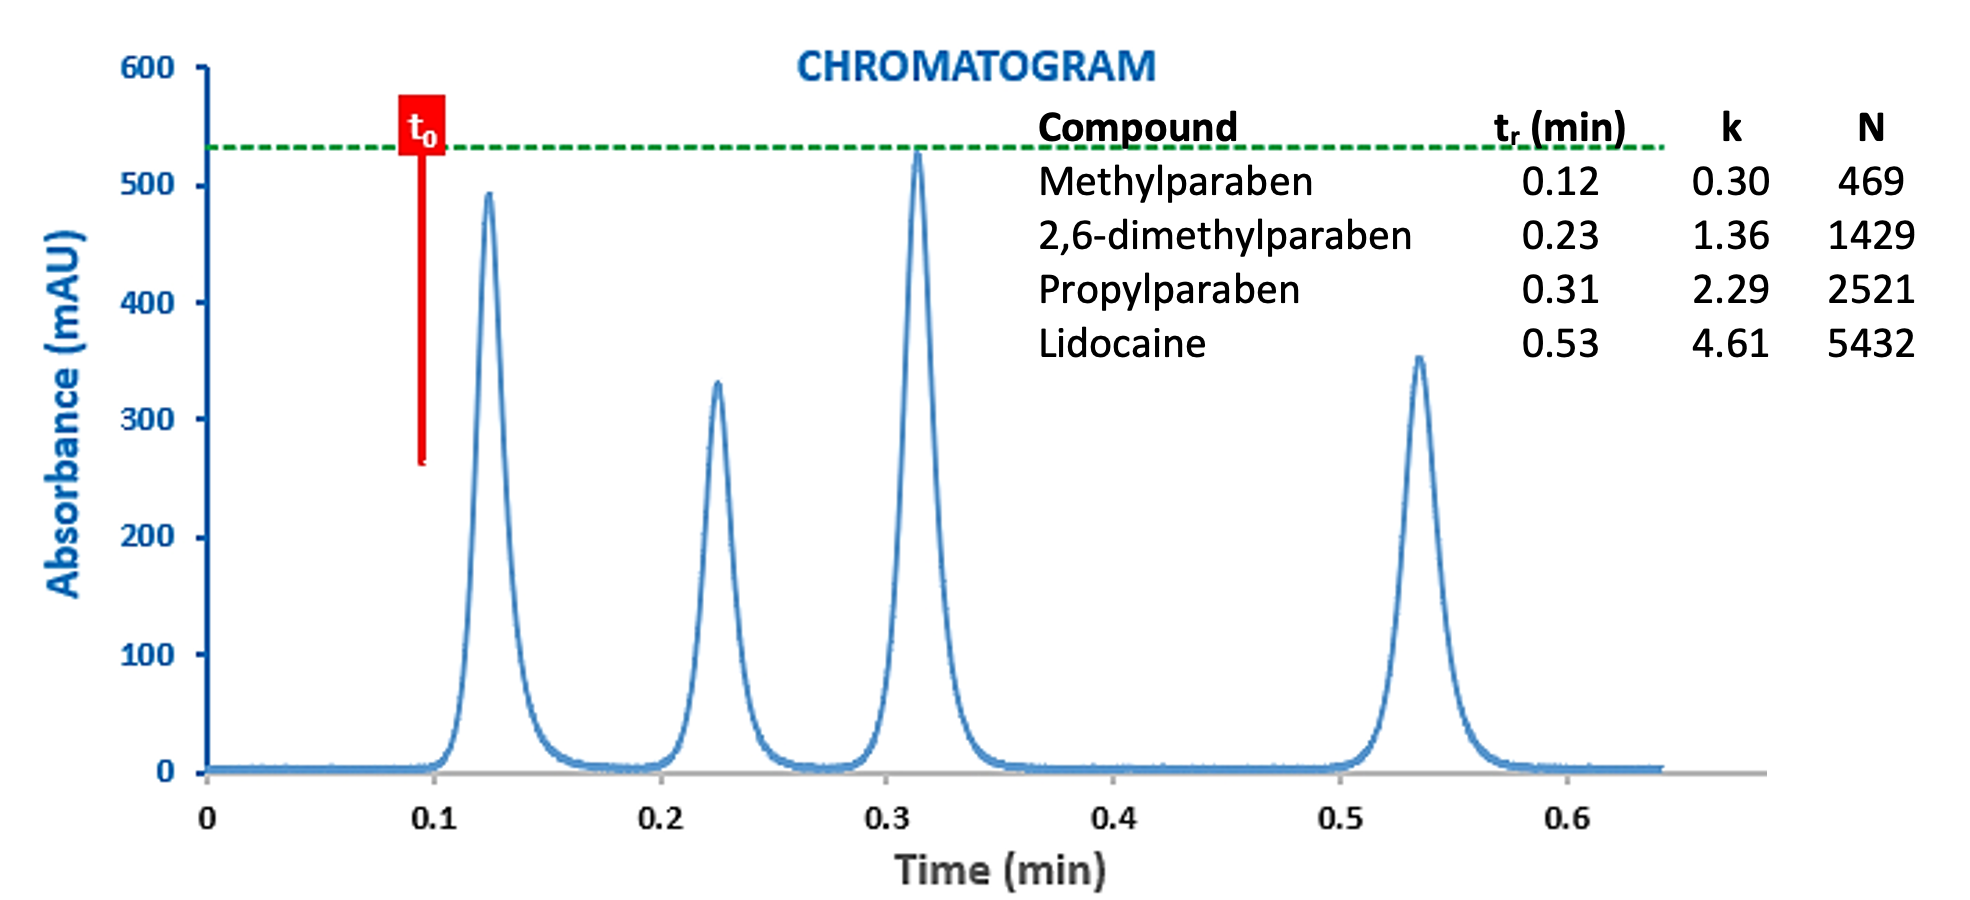 Figure 8: Chromatograms of a Lidocaine Preparation obtained with a ‘Standard’ UHPLC system with post-column flow splitting (1:2) at 0.5 mL/min (top) and 1.0 mL/min (bottom).